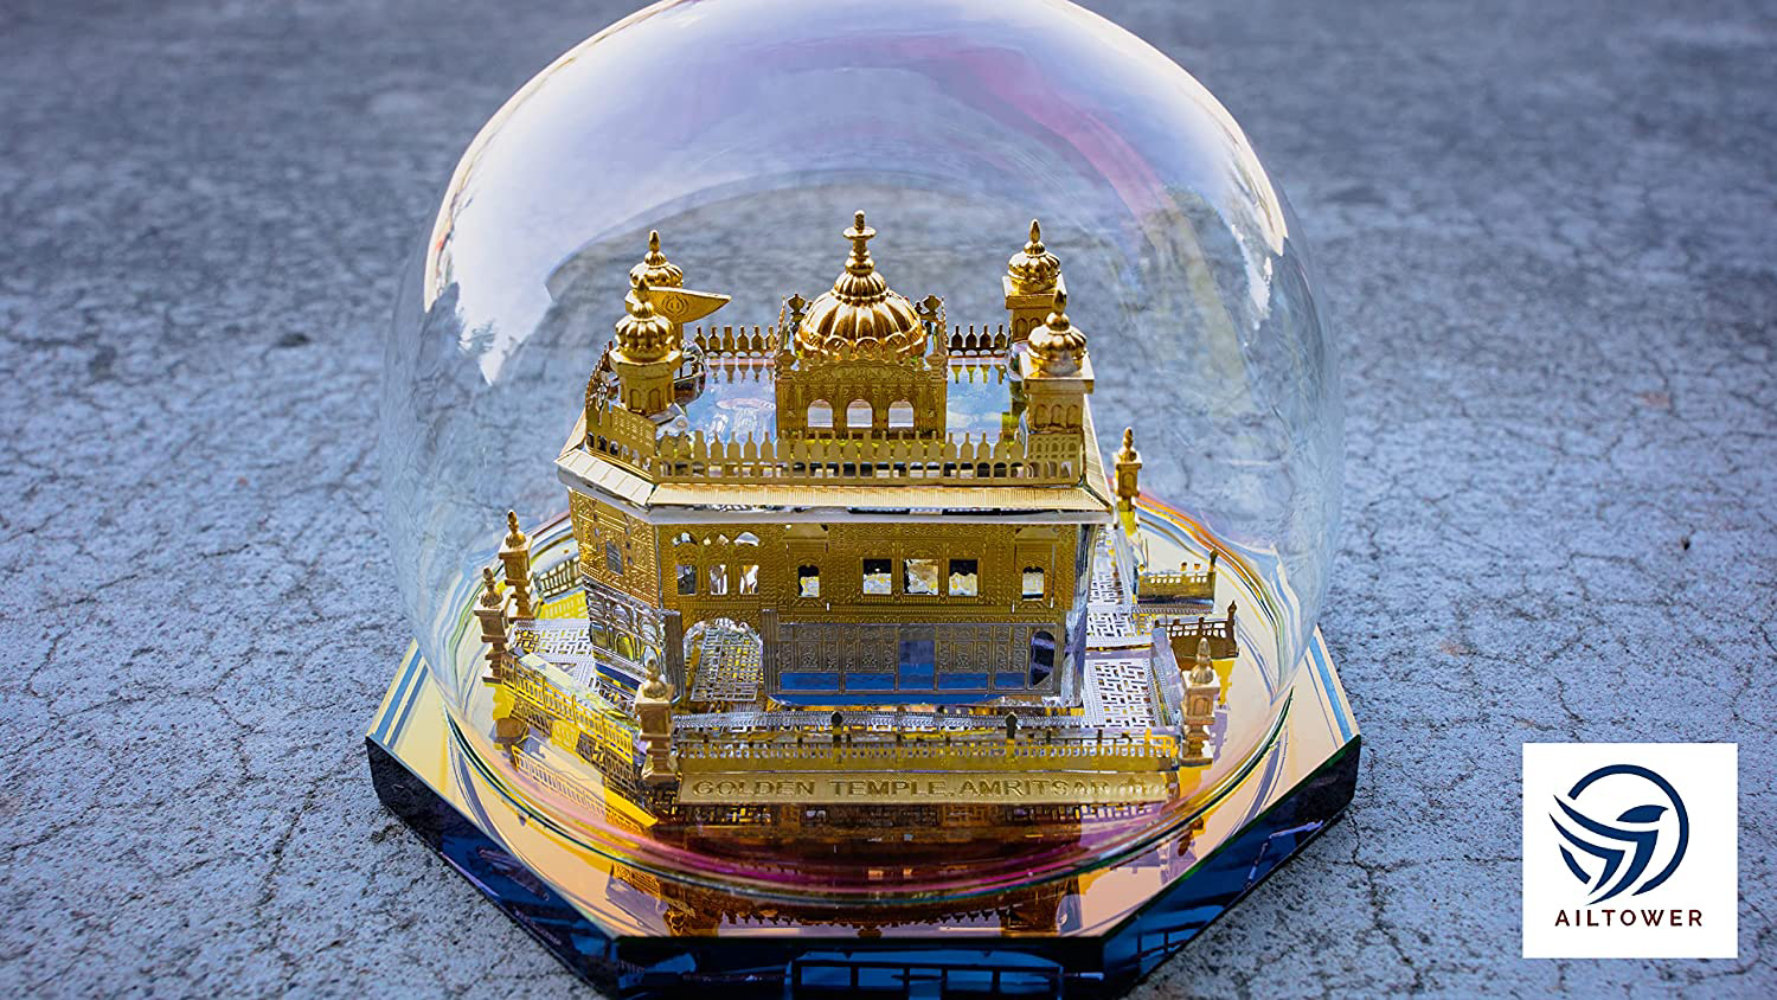 Buy SSE Golden Temple Model, Amritsar (Multicolor Lights) LargeSize  (Showpiece,Collectibles,Gift Items,Decoration  Piece,Souvenir,Table/Home/Office Decoration Item, Religious Item)  28cmX22cmx28cm Online at Low Prices in India - Amazon.in